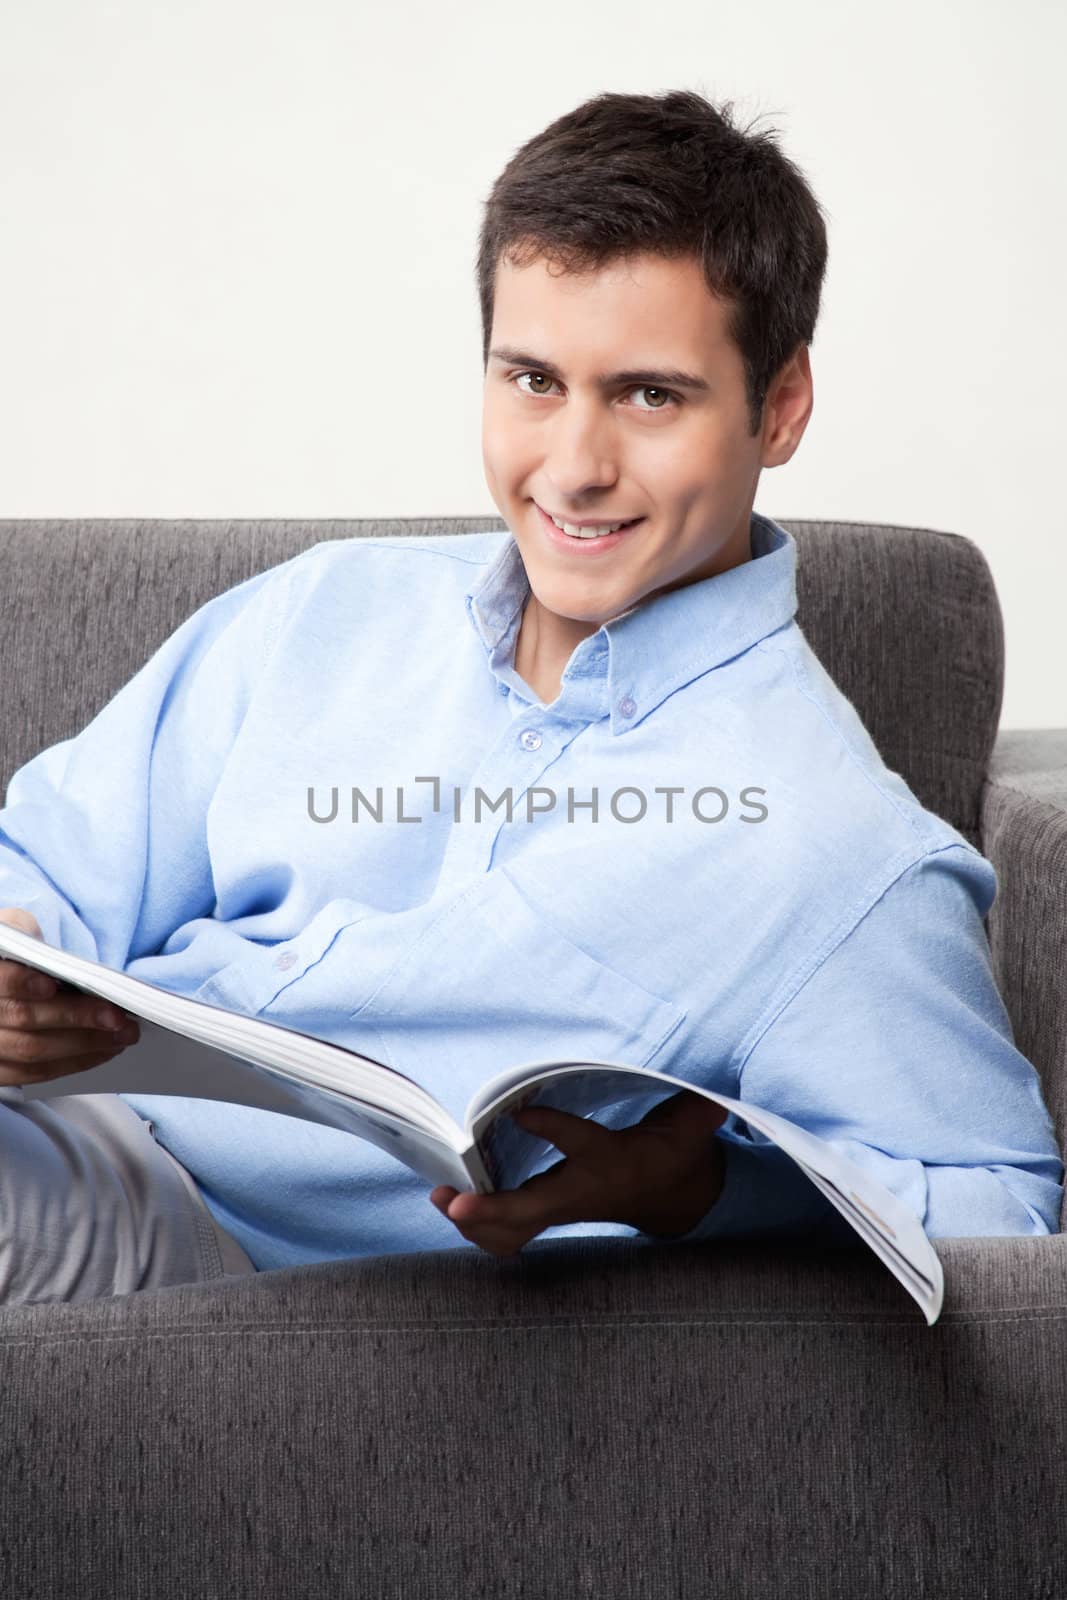 Young man holding magazine on couch.